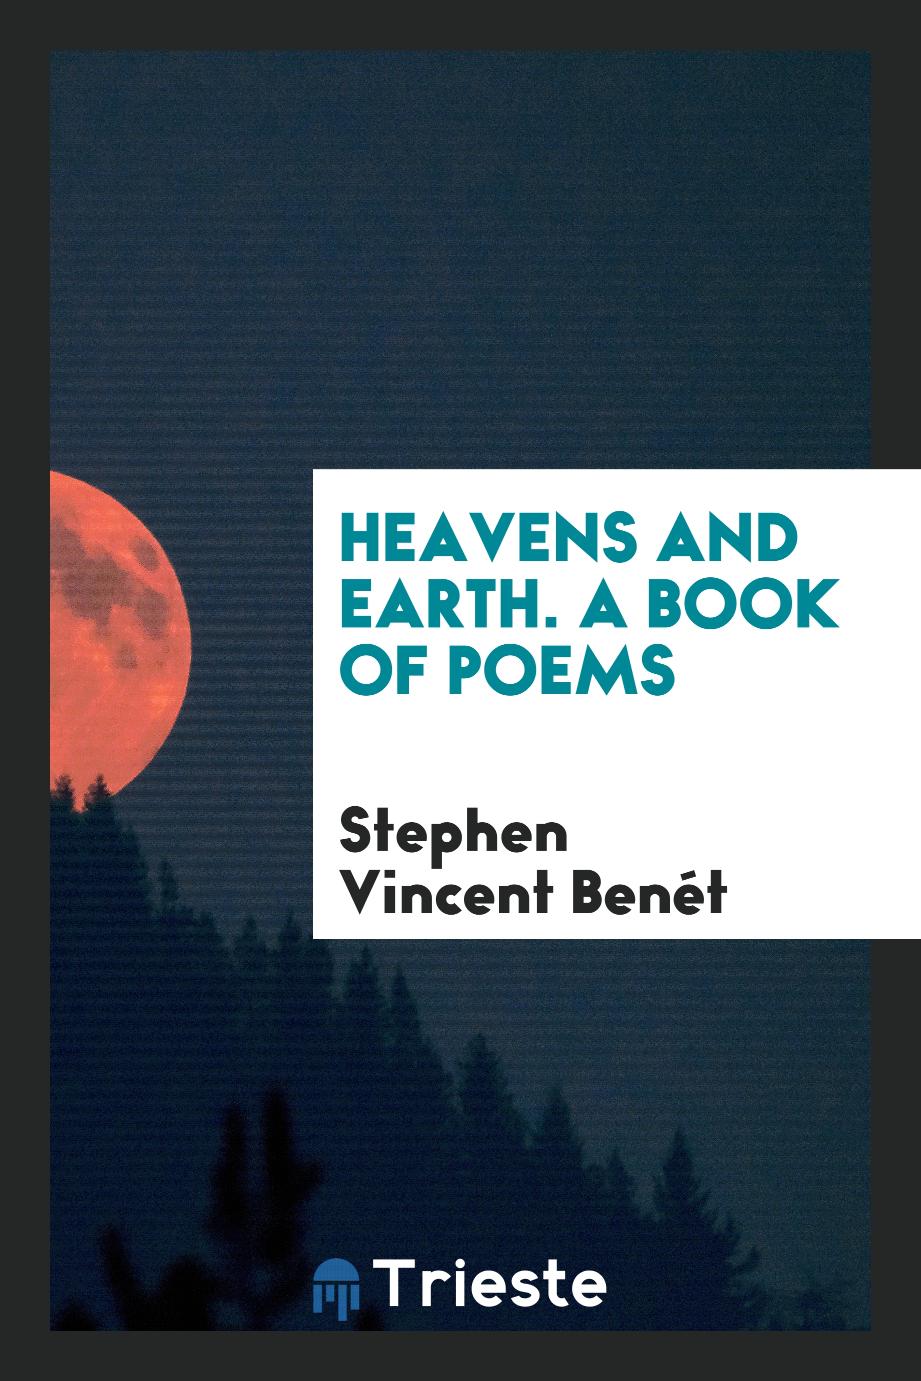 Heavens and Earth. A Book of Poems